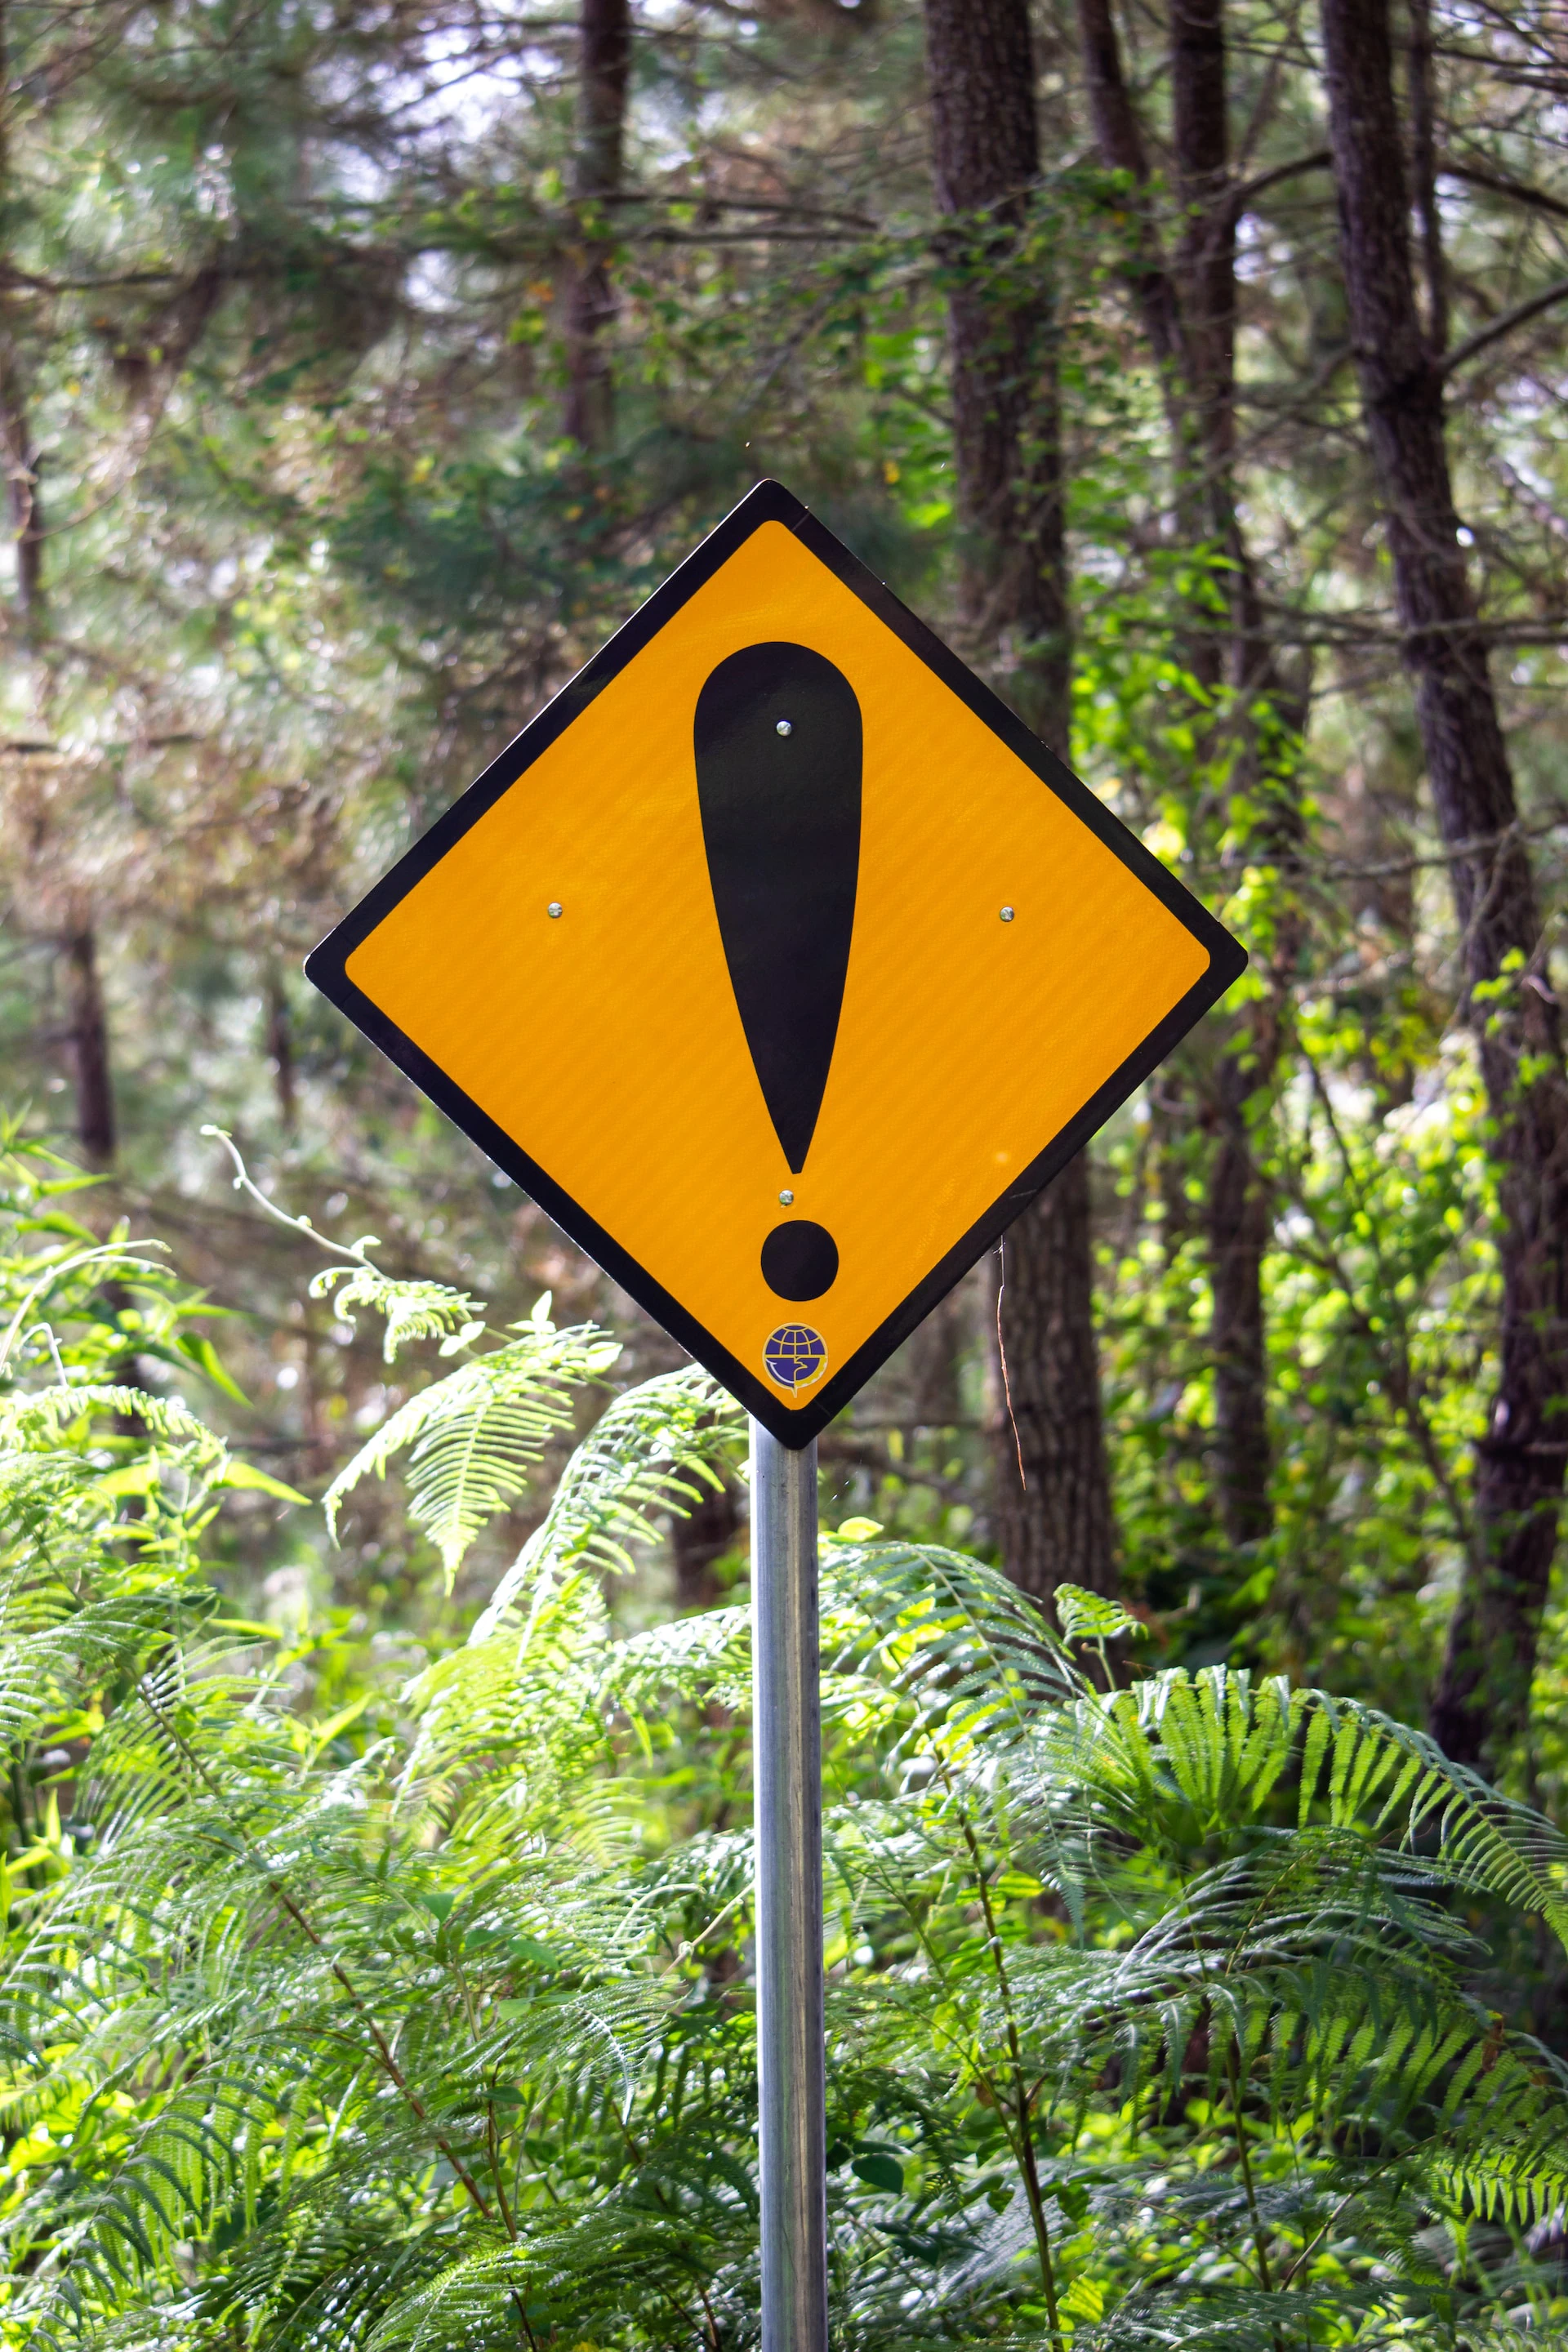 Yellow caution sign in the woods warning of potential danger